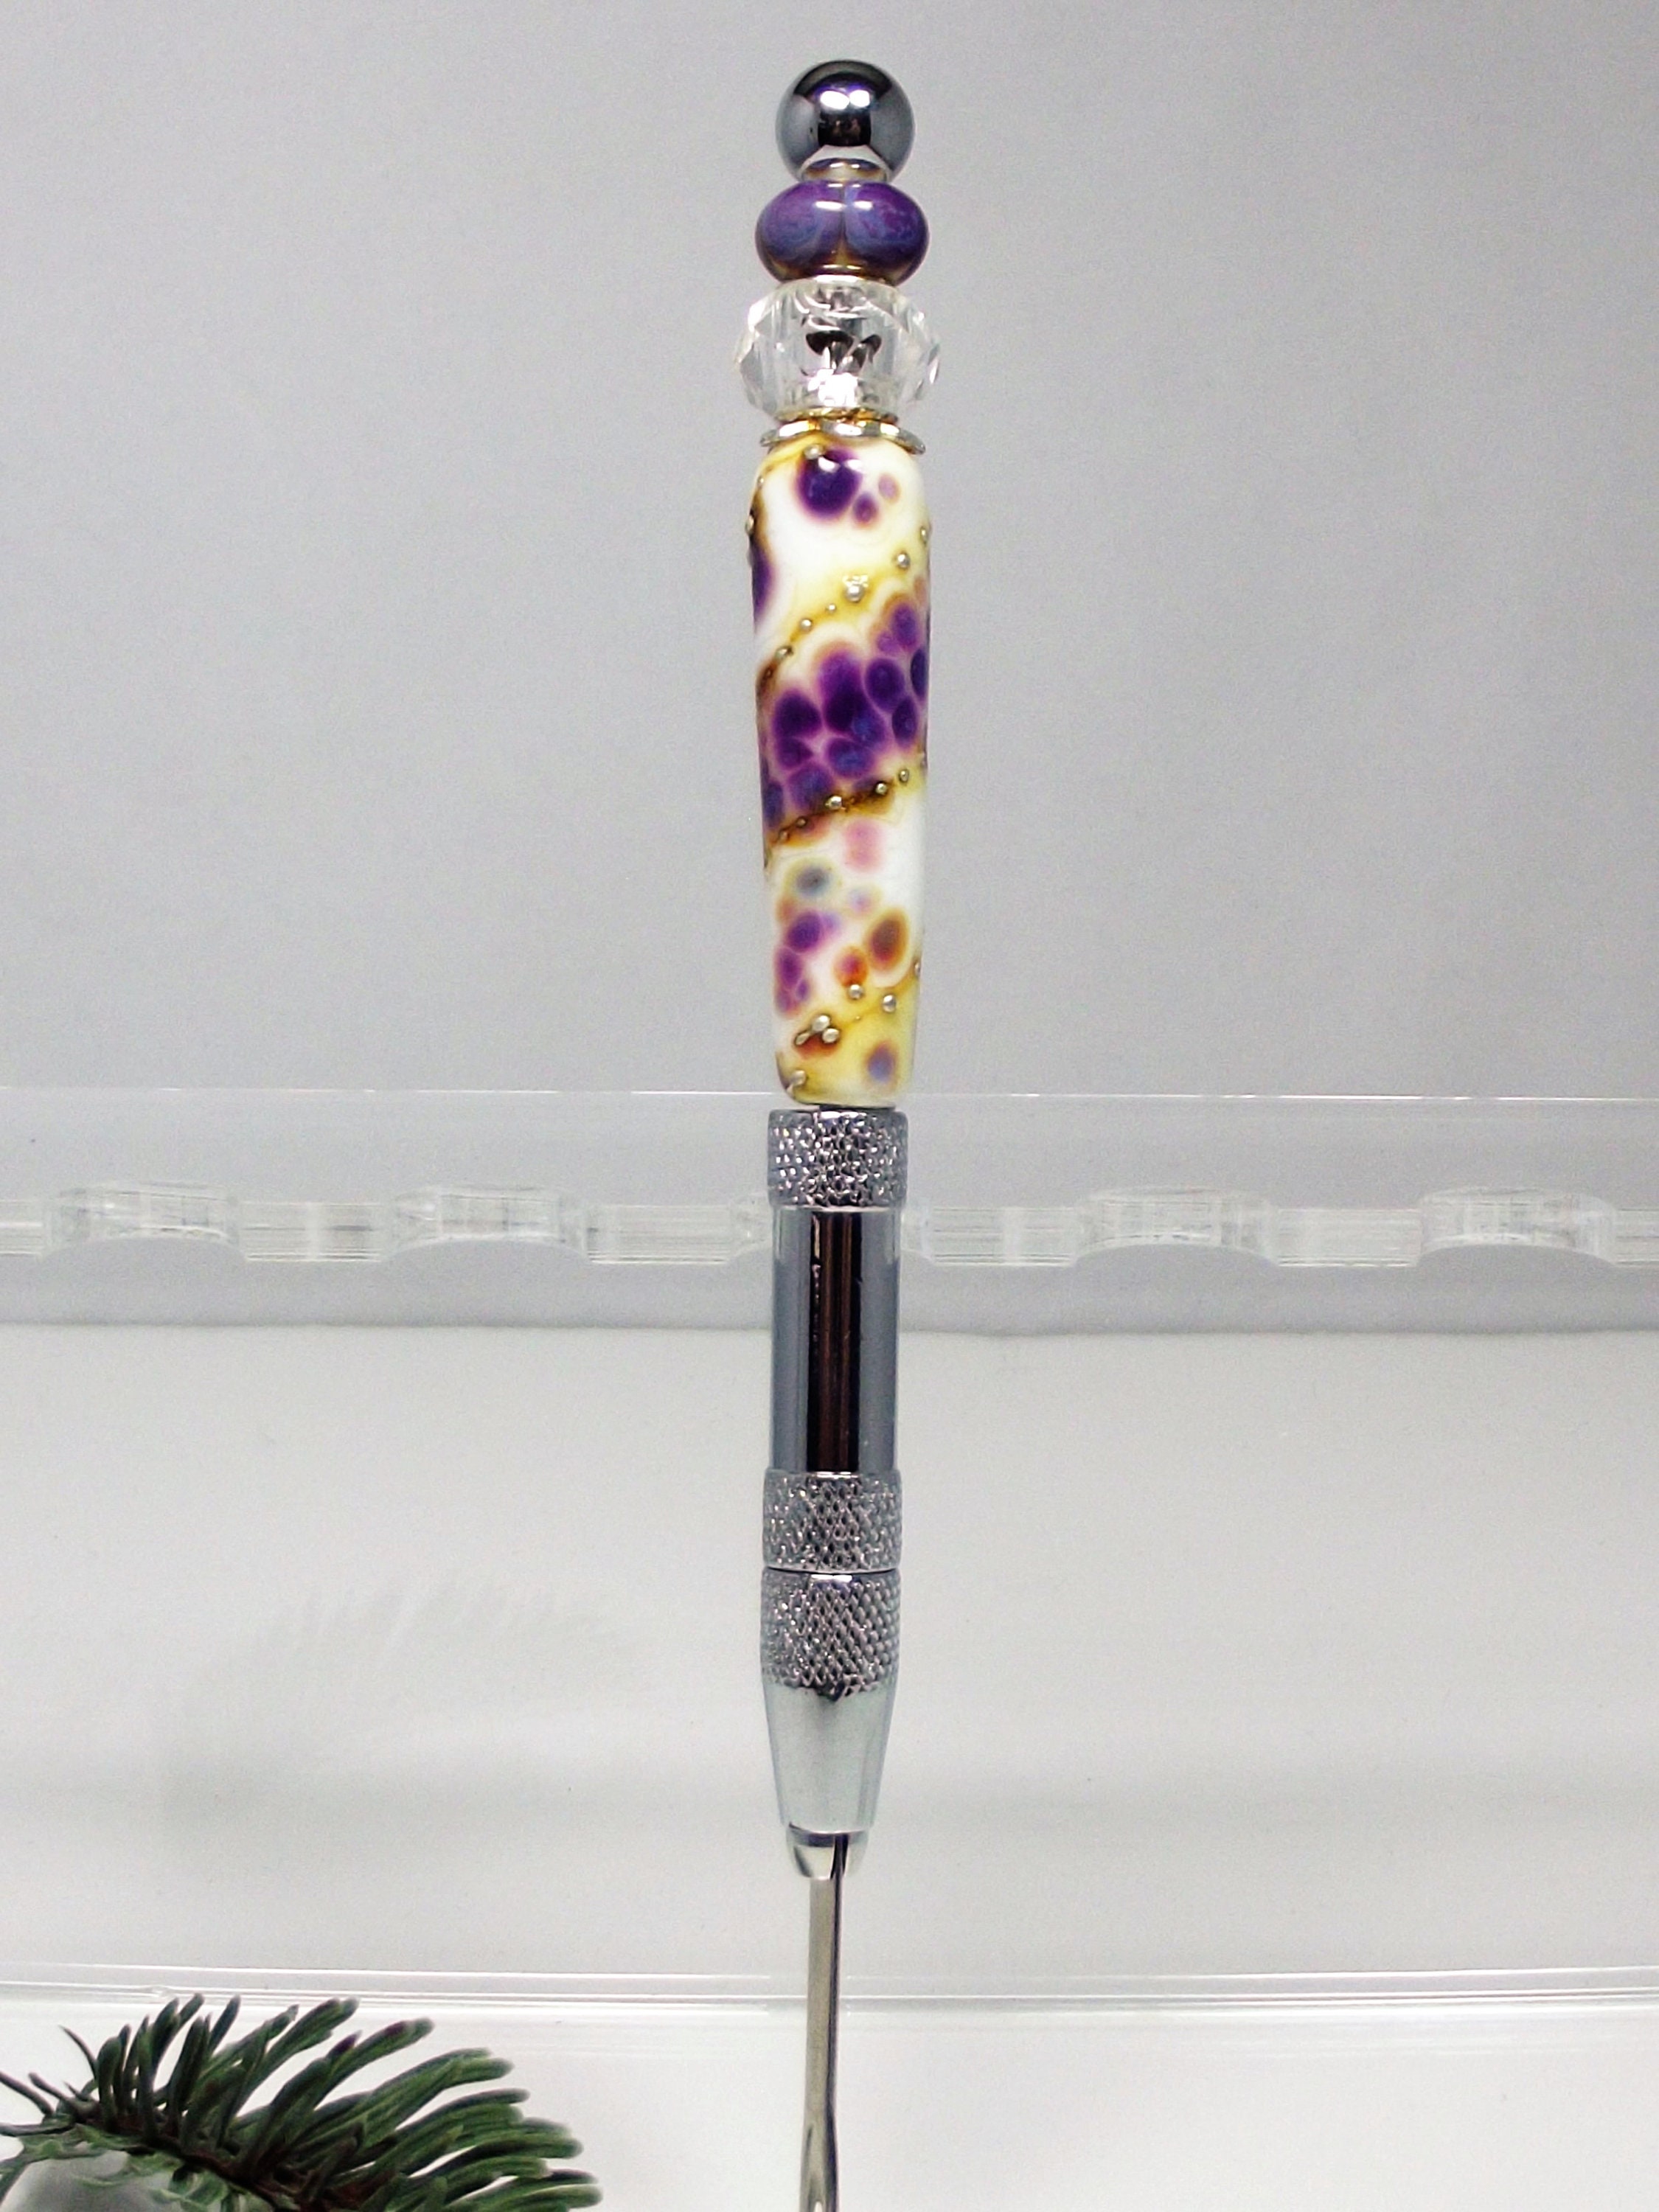 Deluxe Seam Rippers